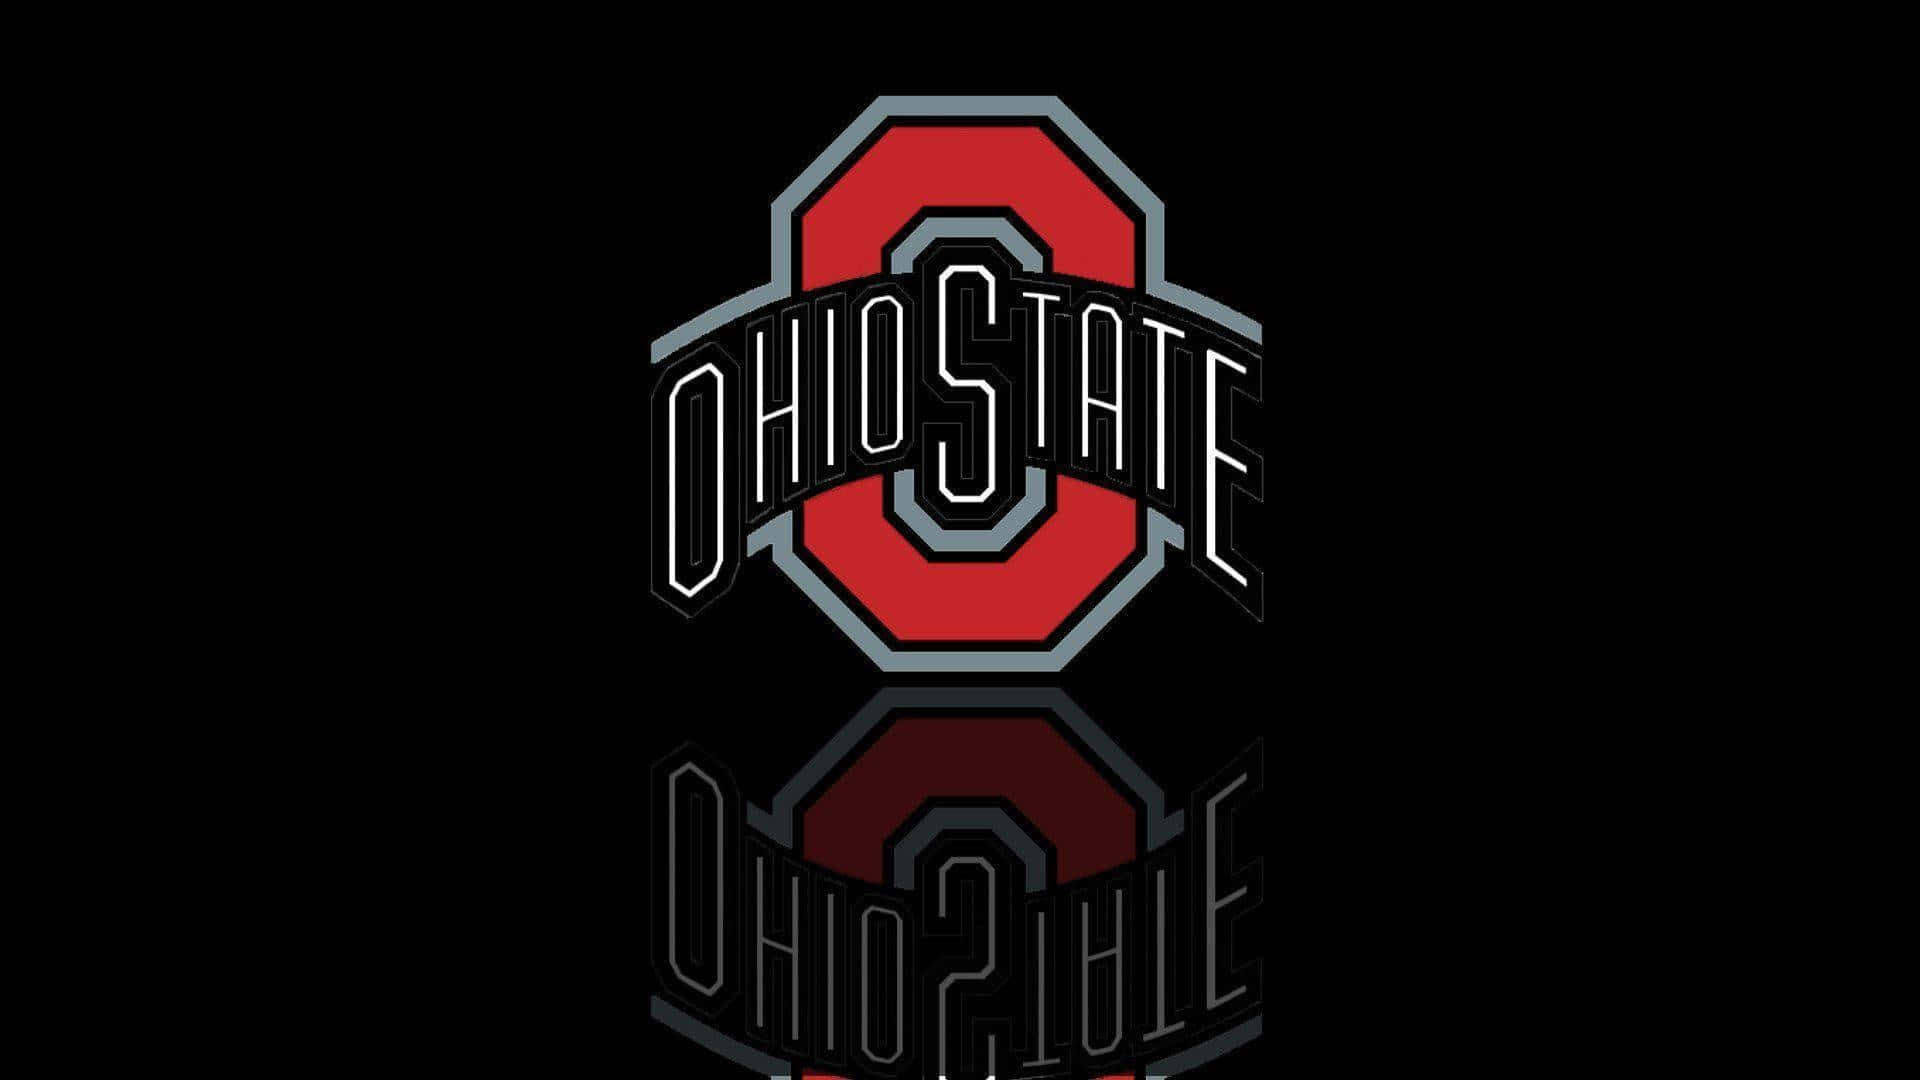 Representing Ohio State with style and pride Wallpaper